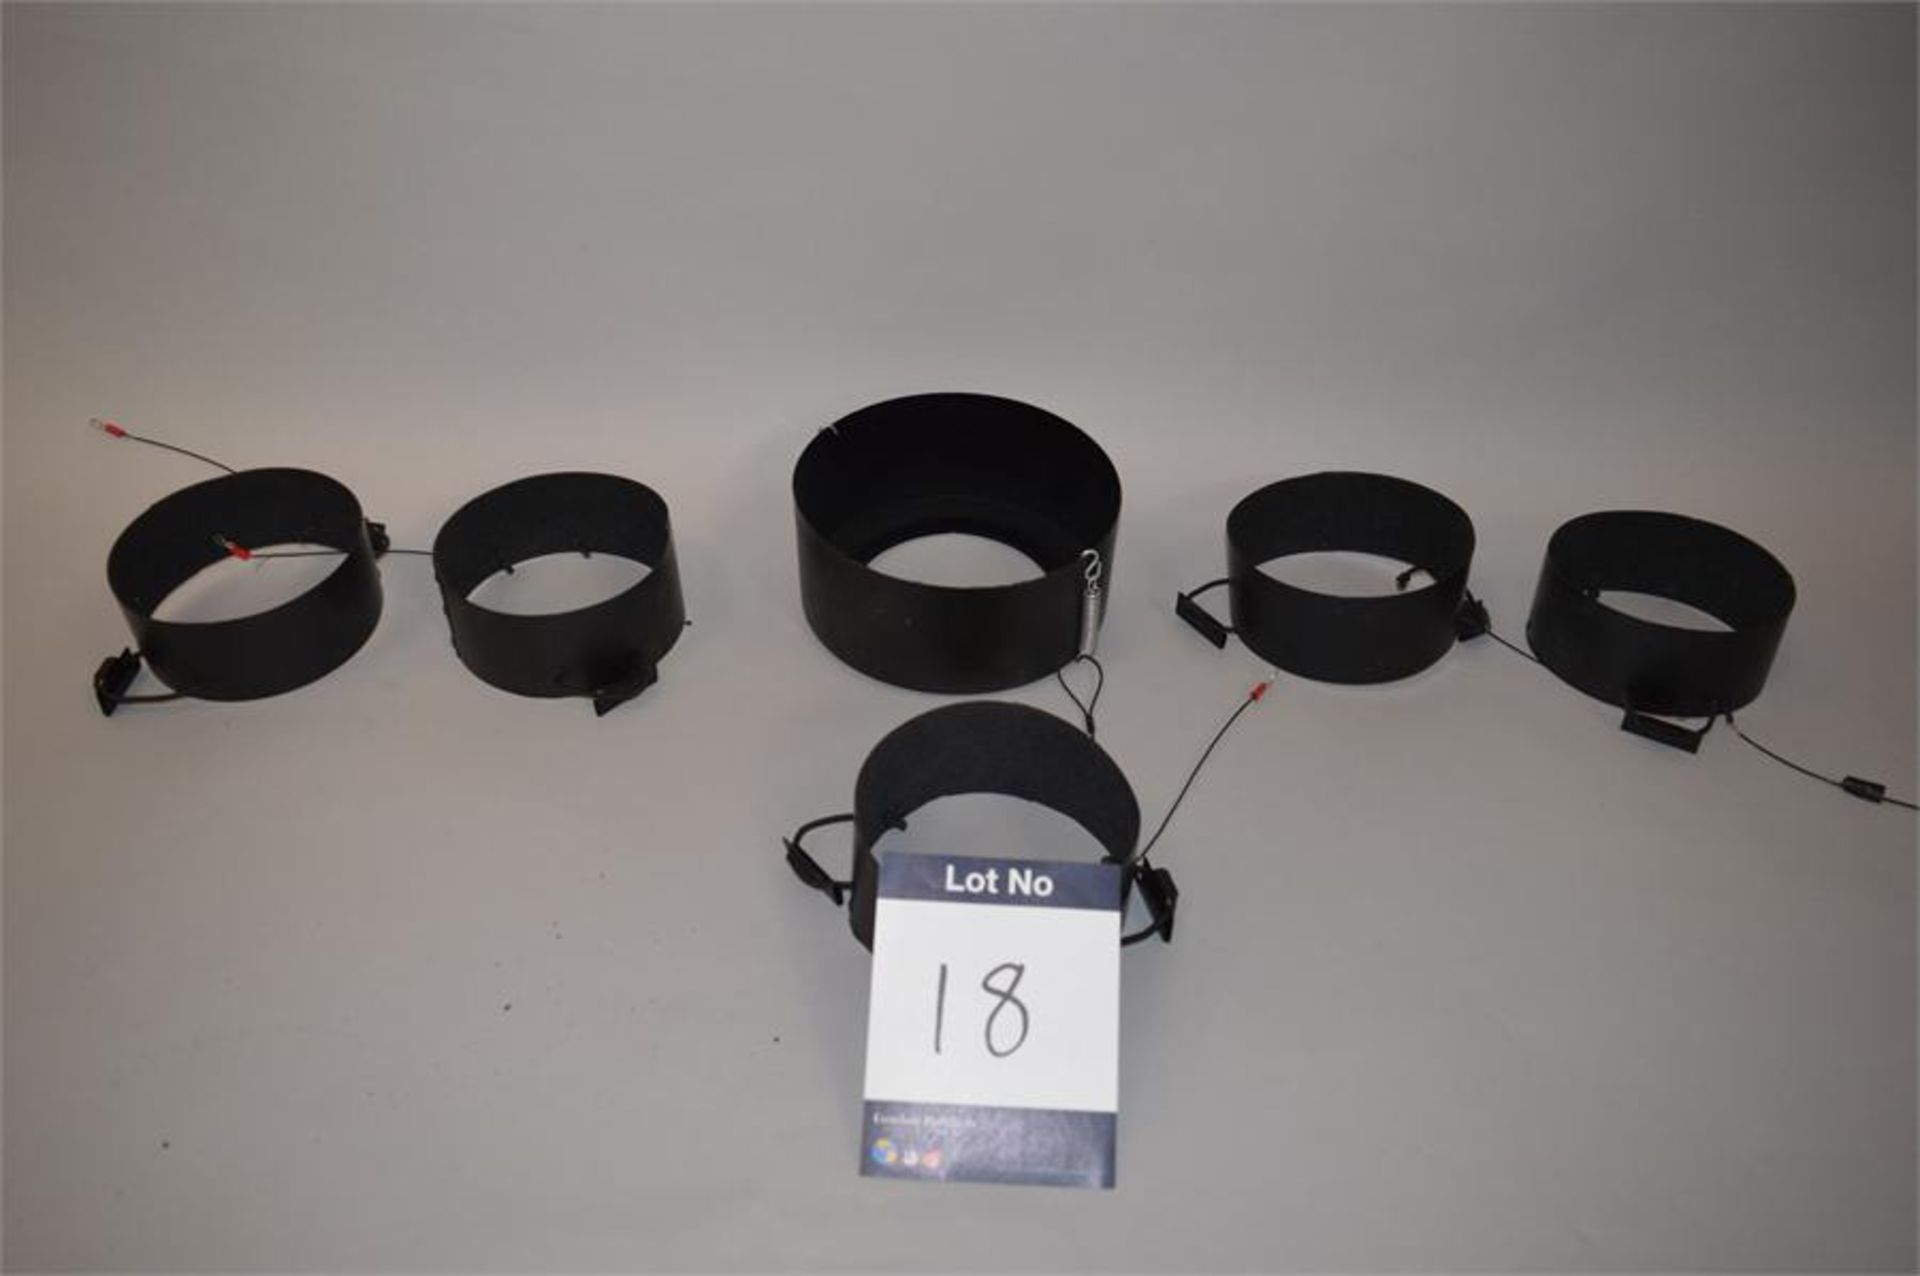 21 x Varilite, VL2000 Narrow 2" Short Top Hats and 2 x Varilite VL2000 Wide Top Hats, as lotted - Image 3 of 4